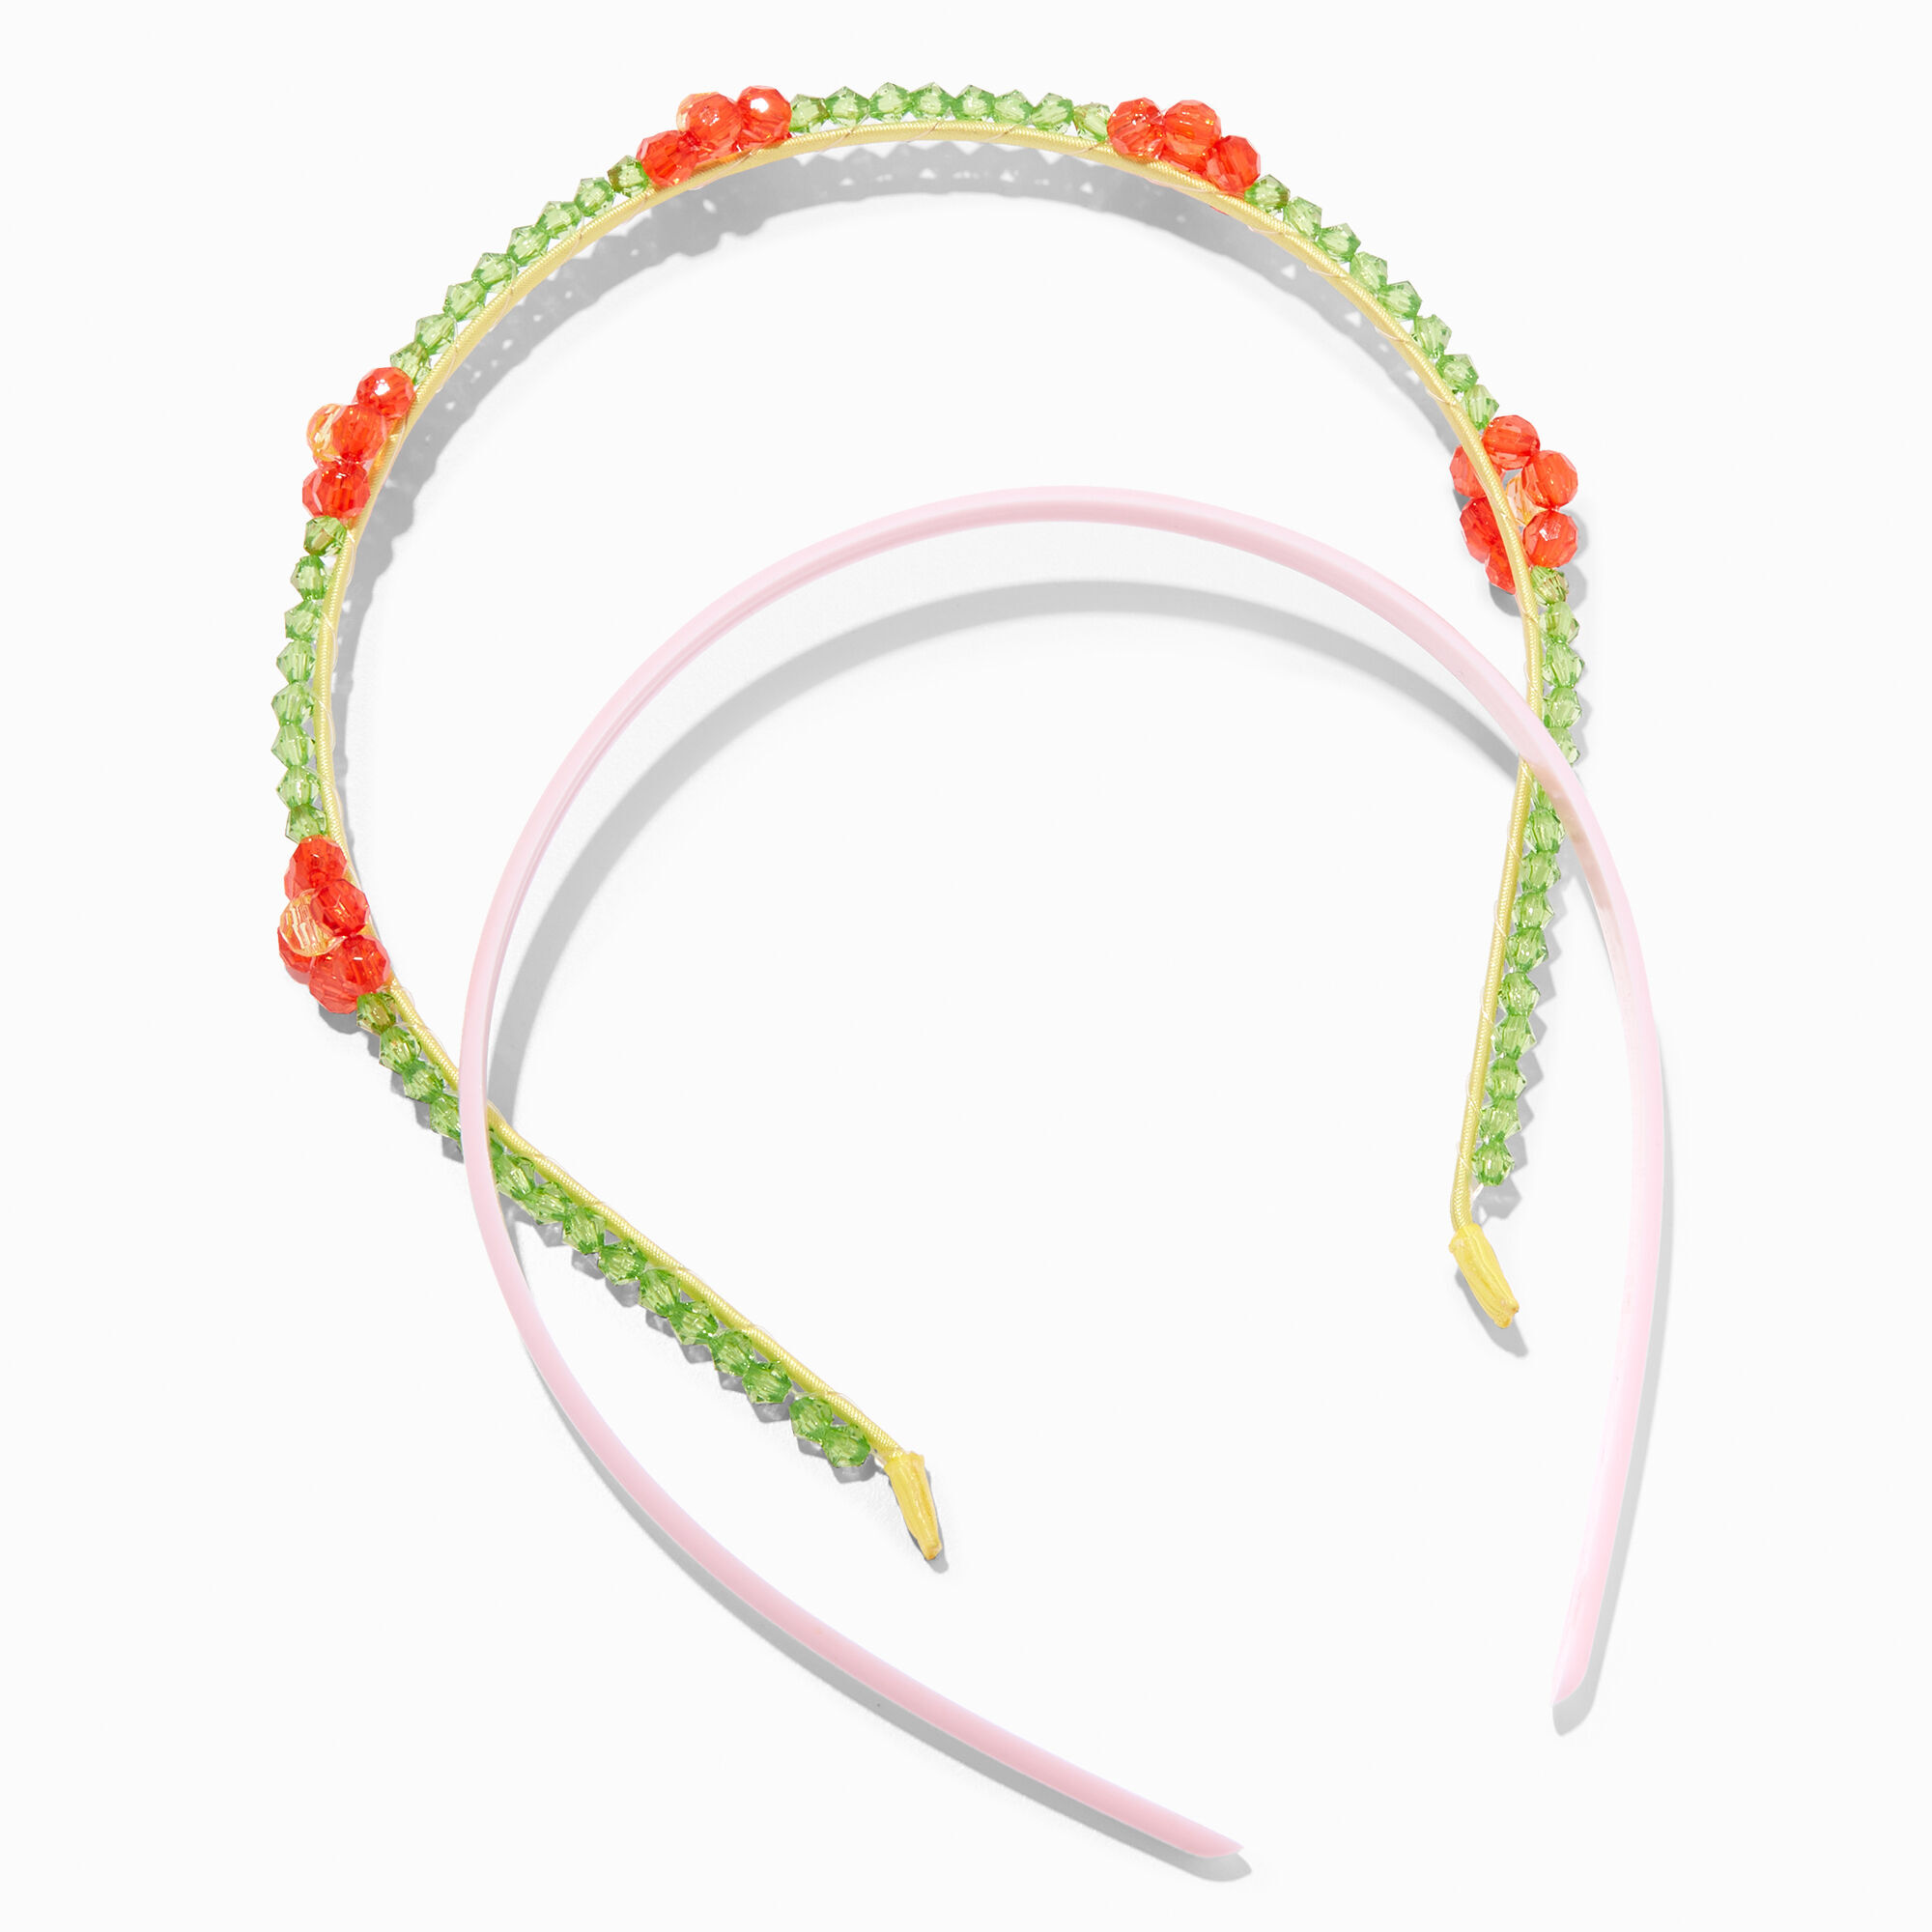 View Claires Beaded Flower Headbands 2 Pack Pink information